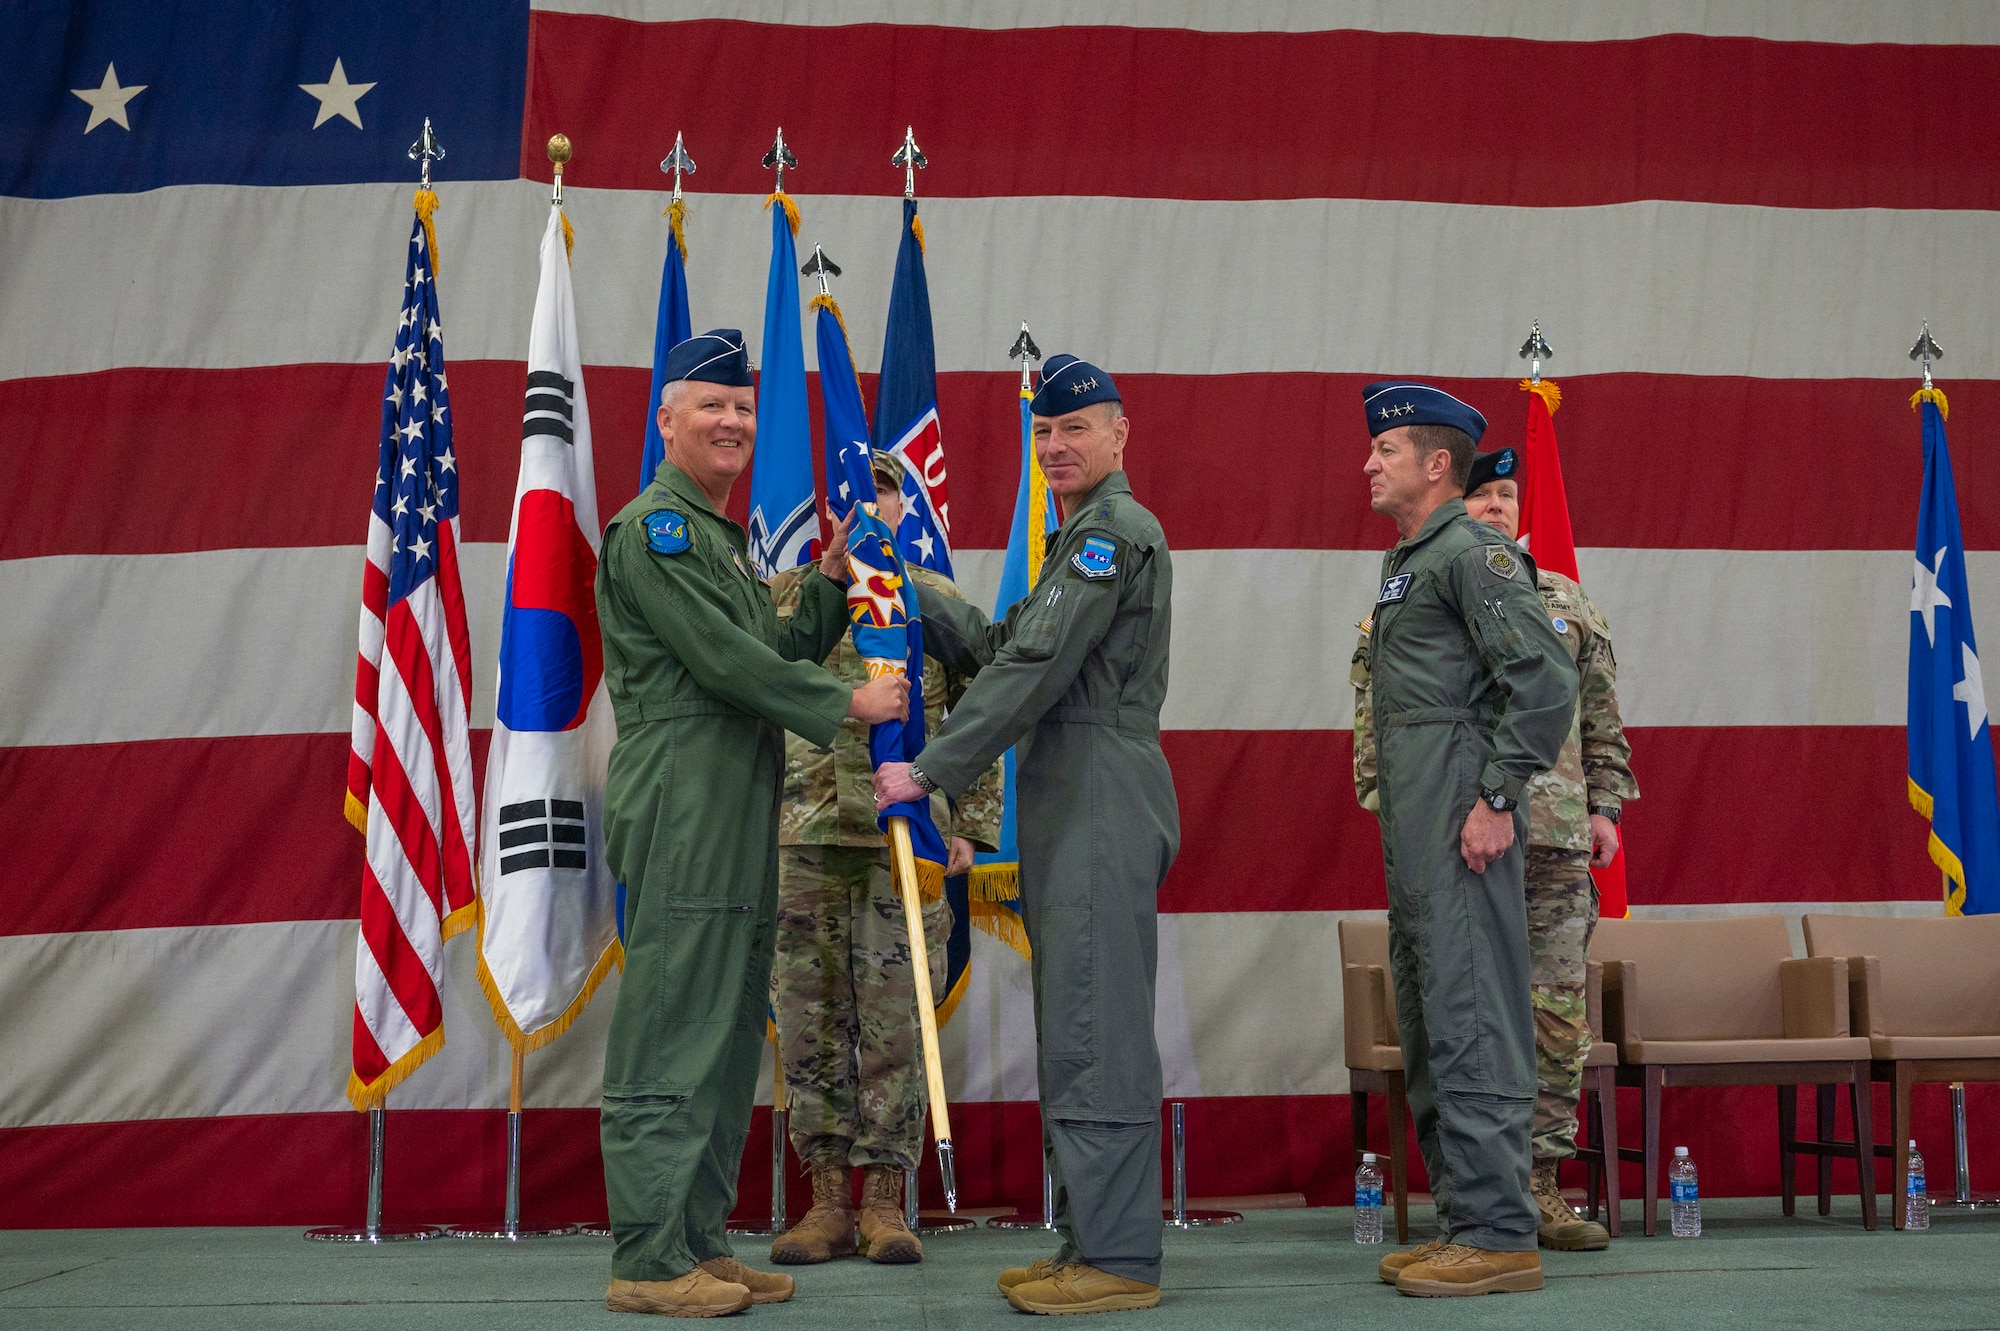 U.S. Air Force Lt. Gen. James Jacobson, Headquarters Pacific Air Forces deputy commander, receives the guidon from U.S. Air Force Lt. Gen. Scott Pleus, outgoing Seventh Air Force commander, in front of a flag on a stage at the Seventh Air Force change of command ceremony at Osan Air Base, Republic of Korea.